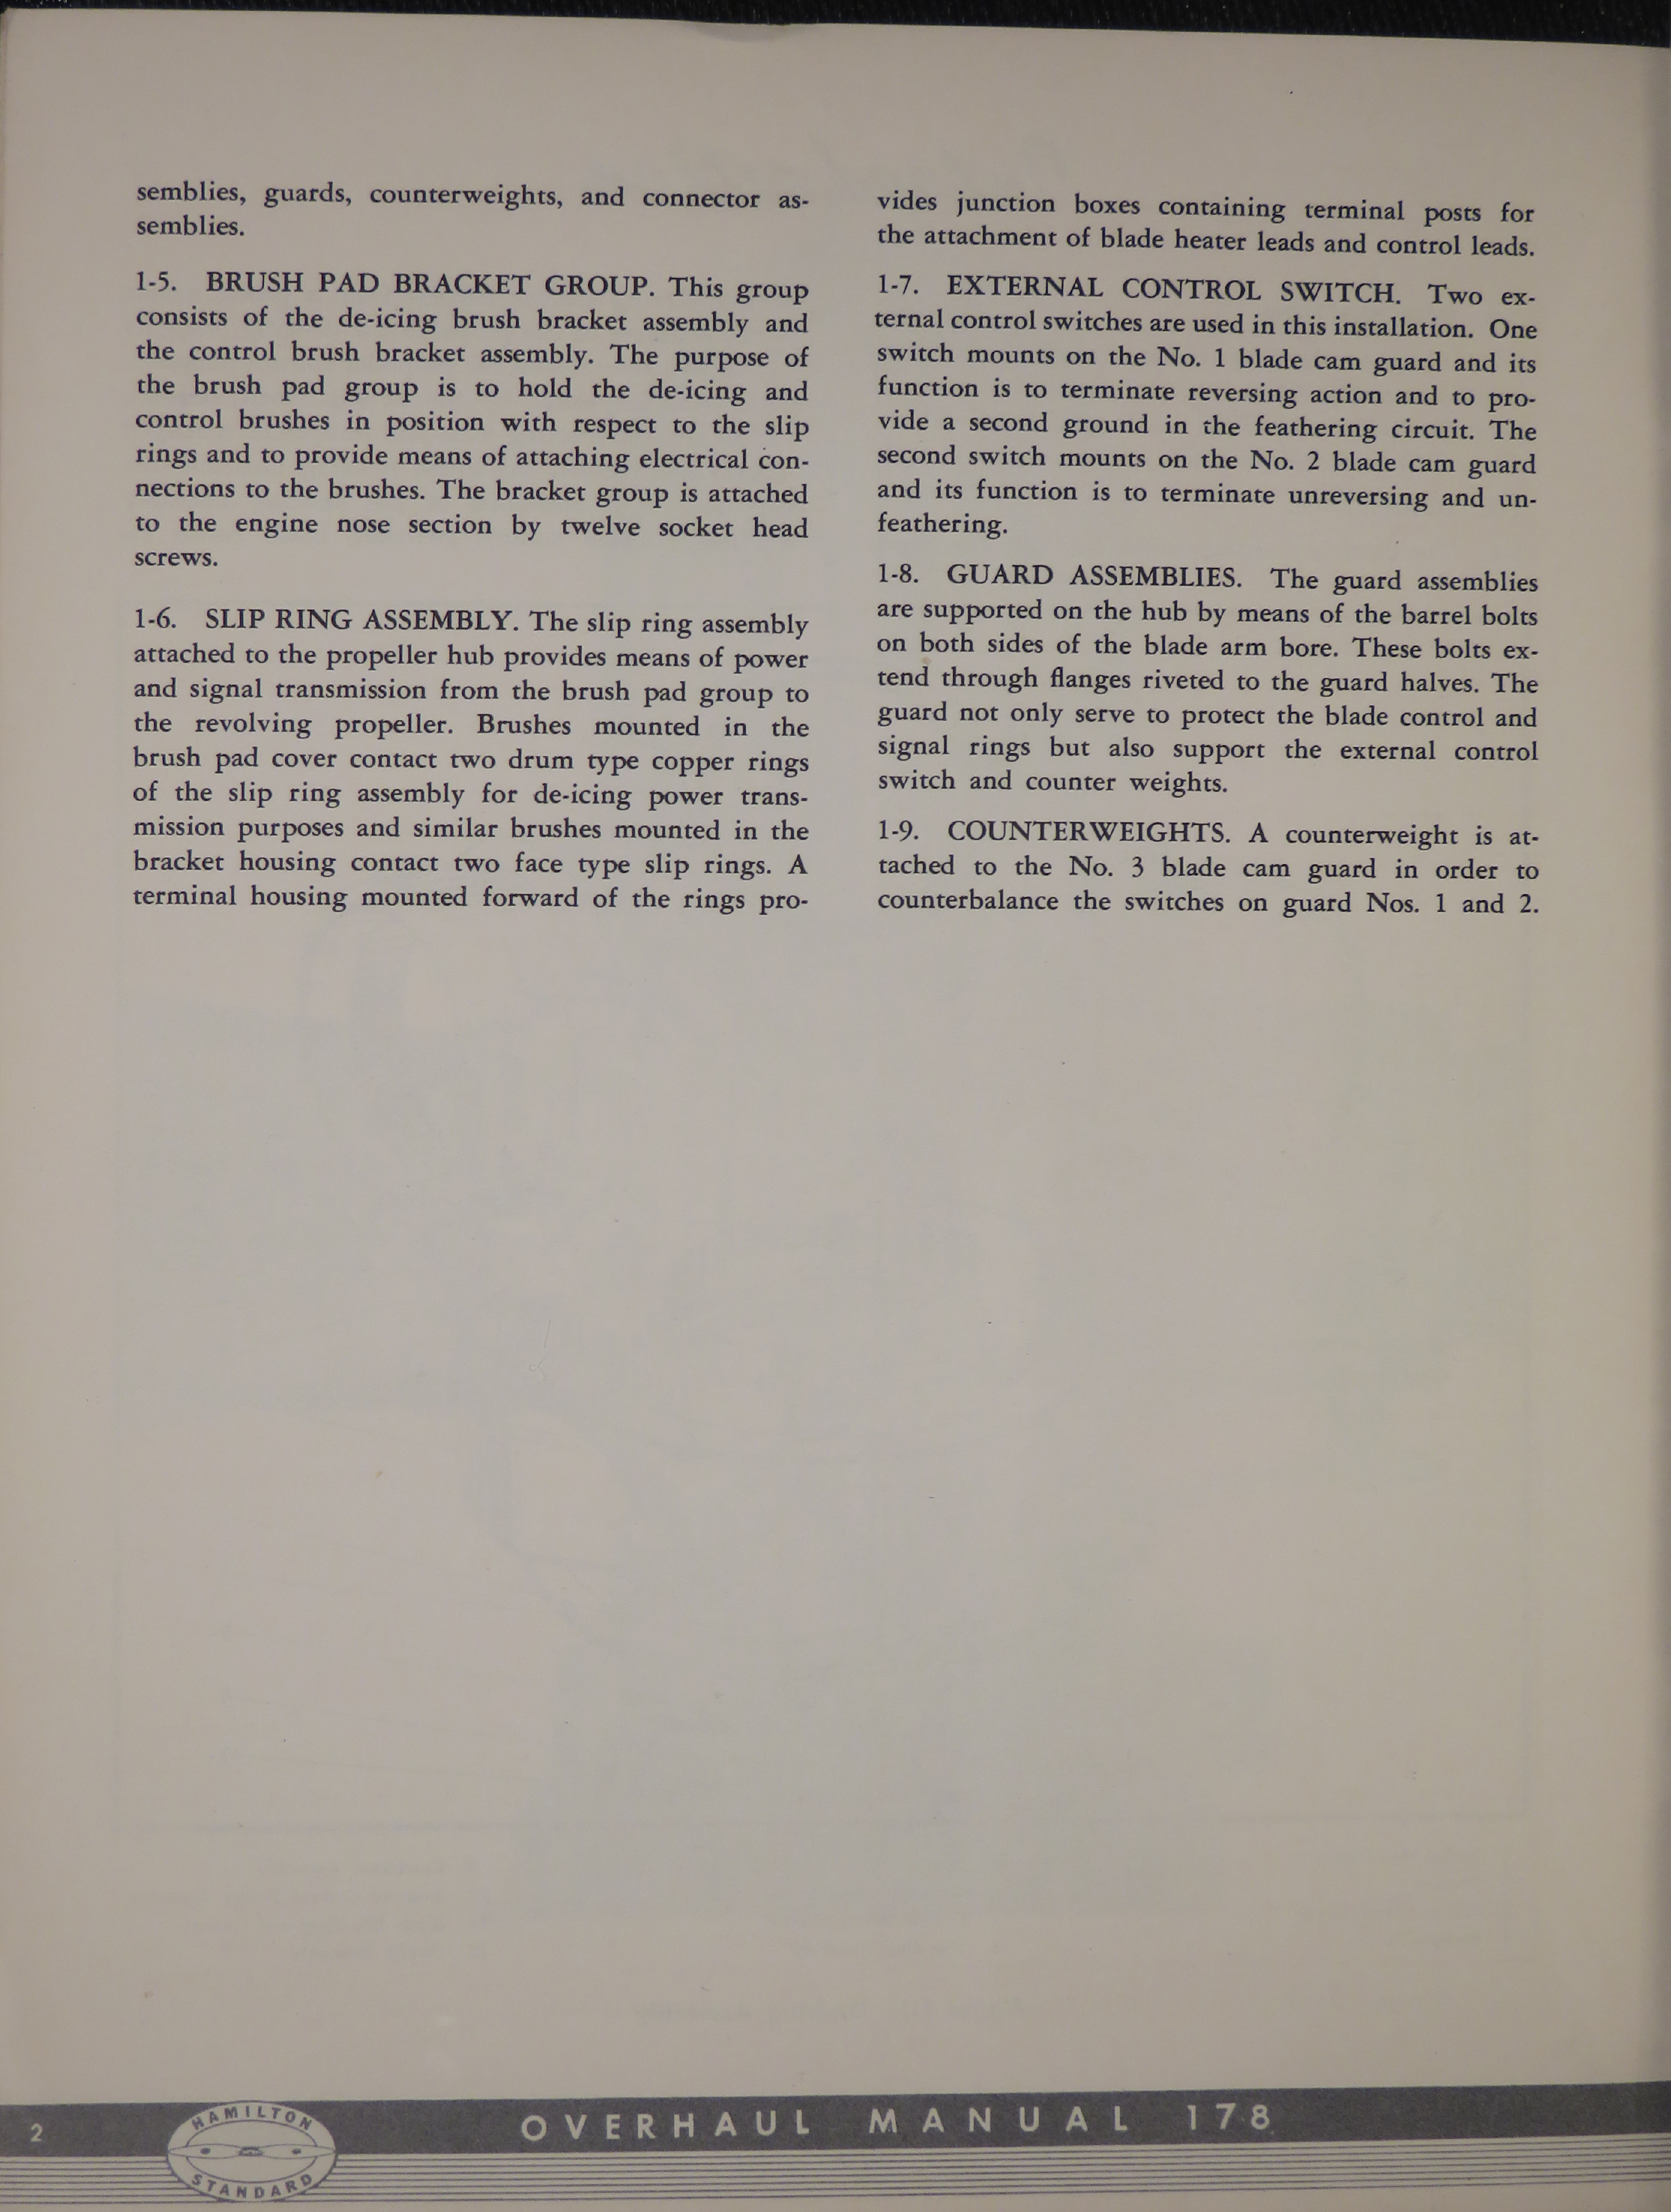 Sample page 8 from AirCorps Library document: Overhaul Manual for Hamilton Standard Model 43E60 Electric Deicing Assemblies